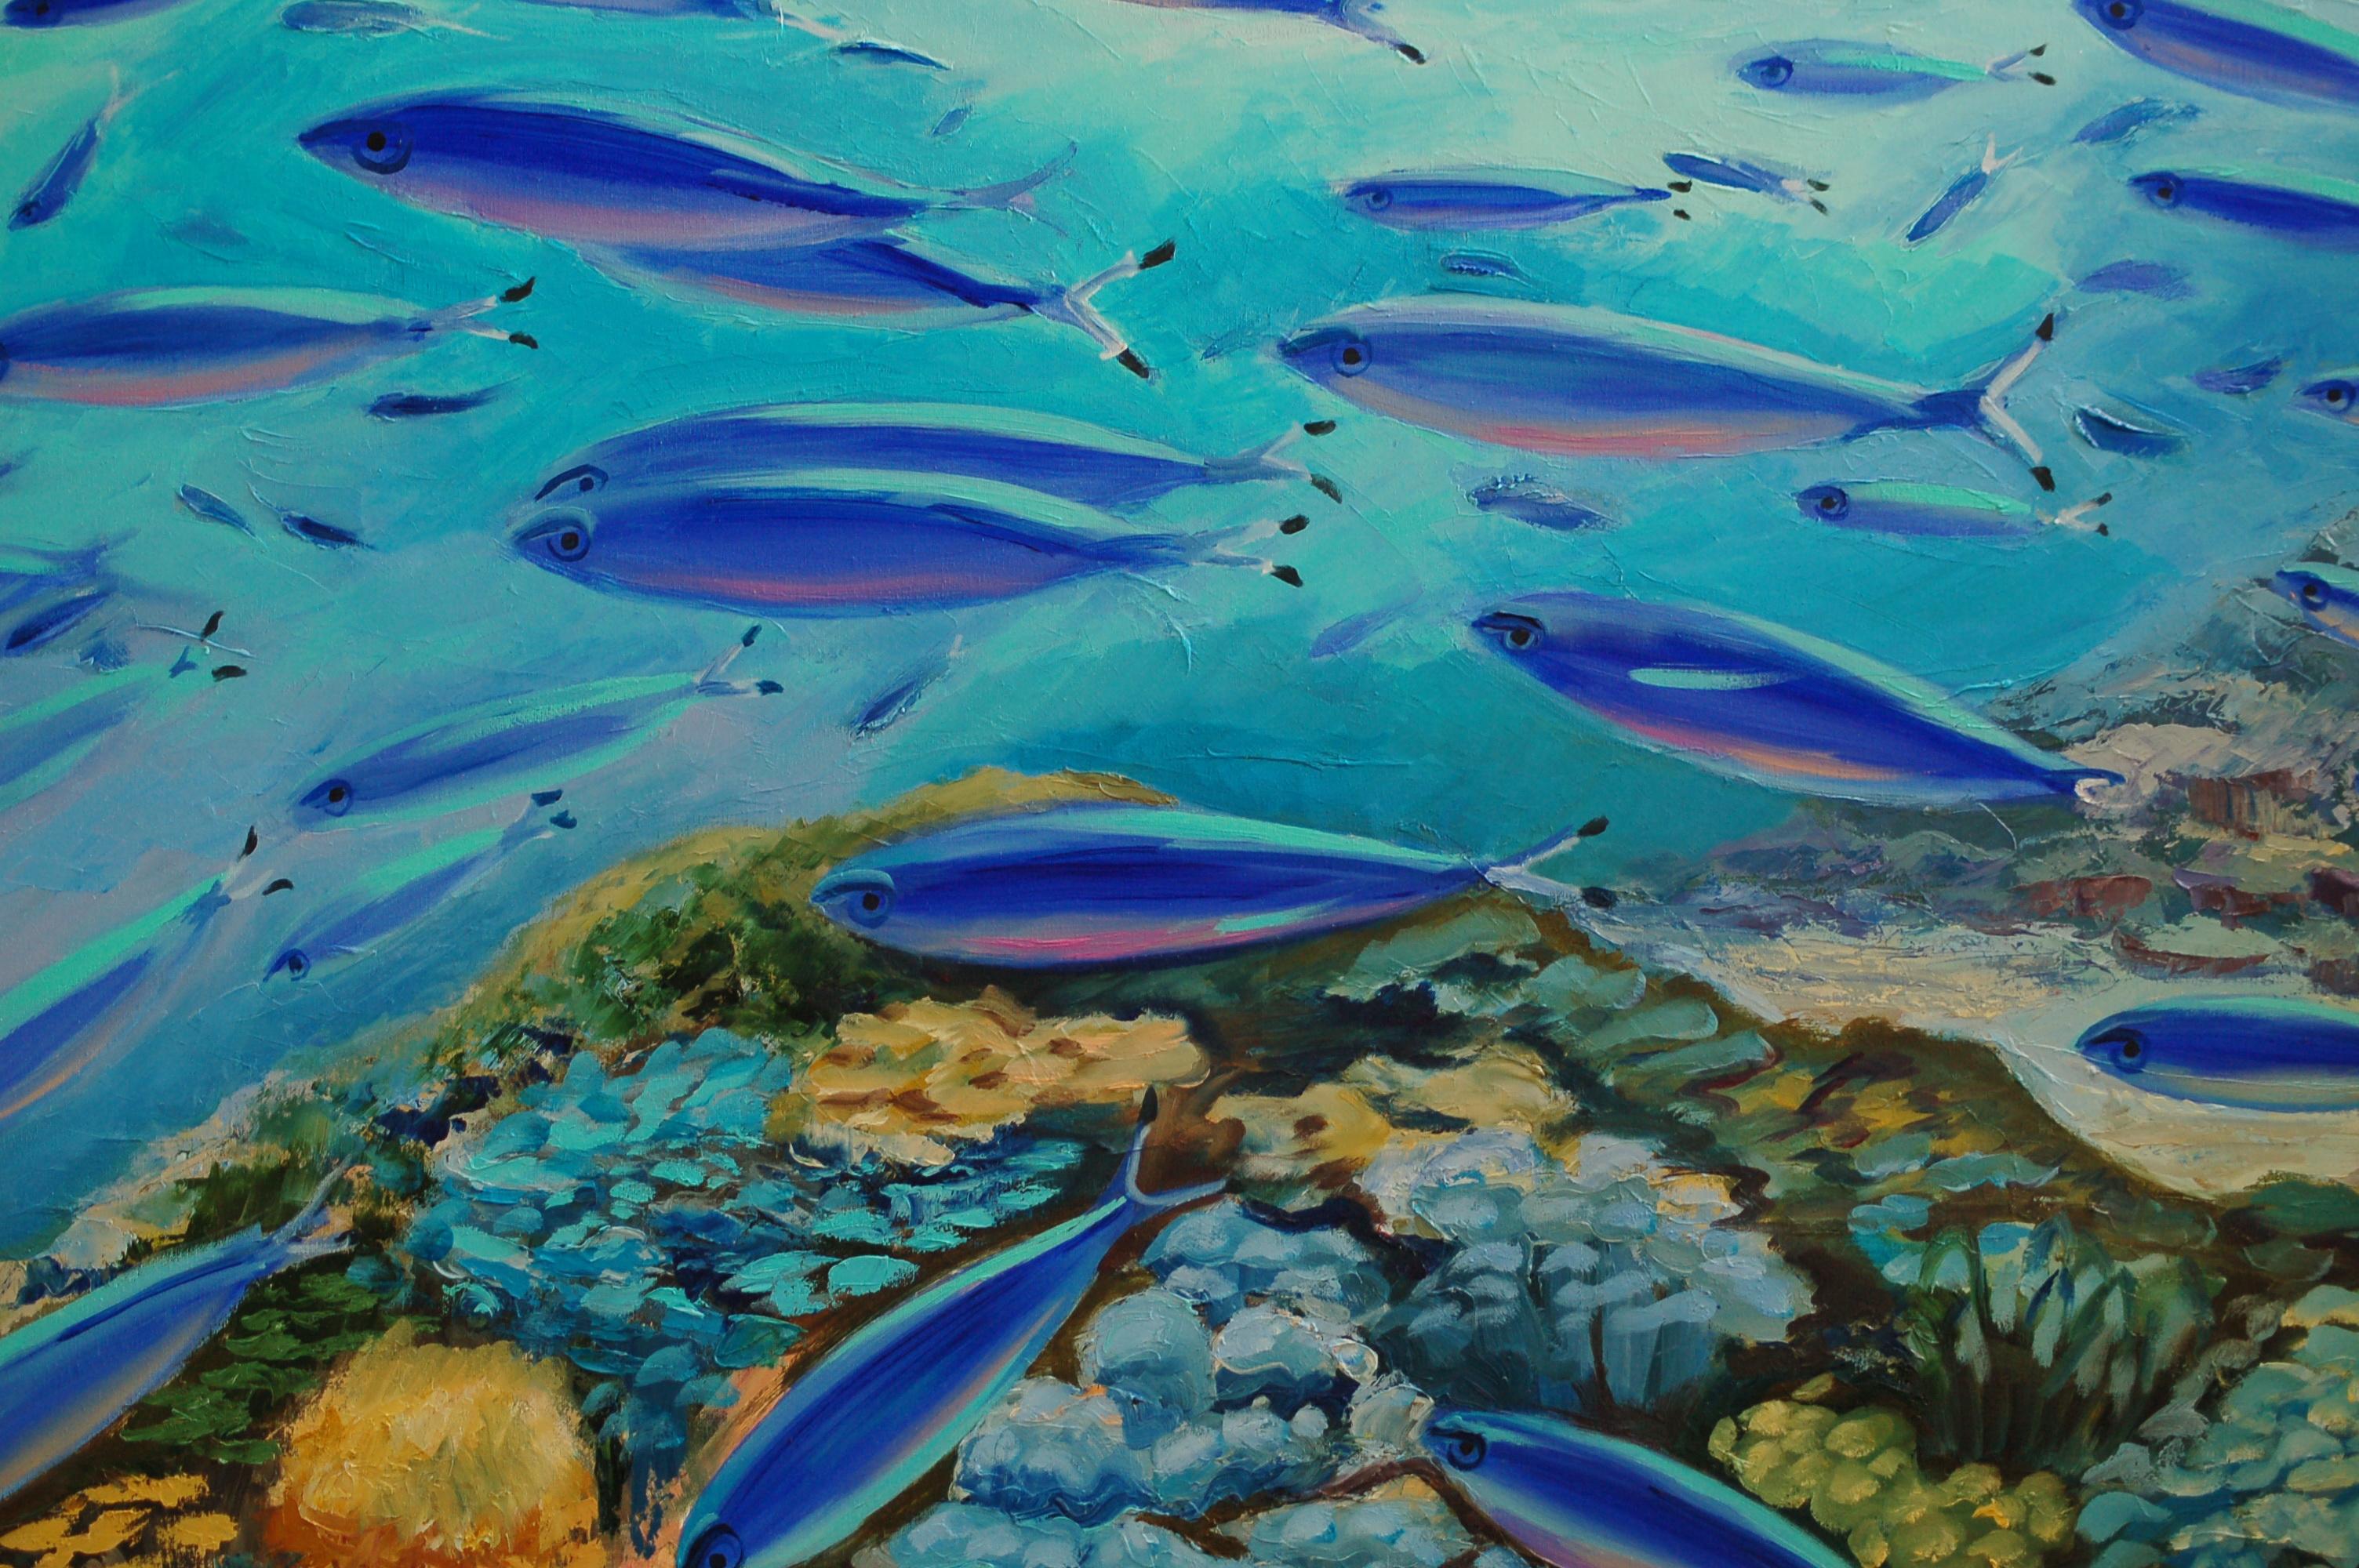 Blue Fish in Tropical Coral Reef Giclèe Pring with hand touch by Olga Nikitina 2